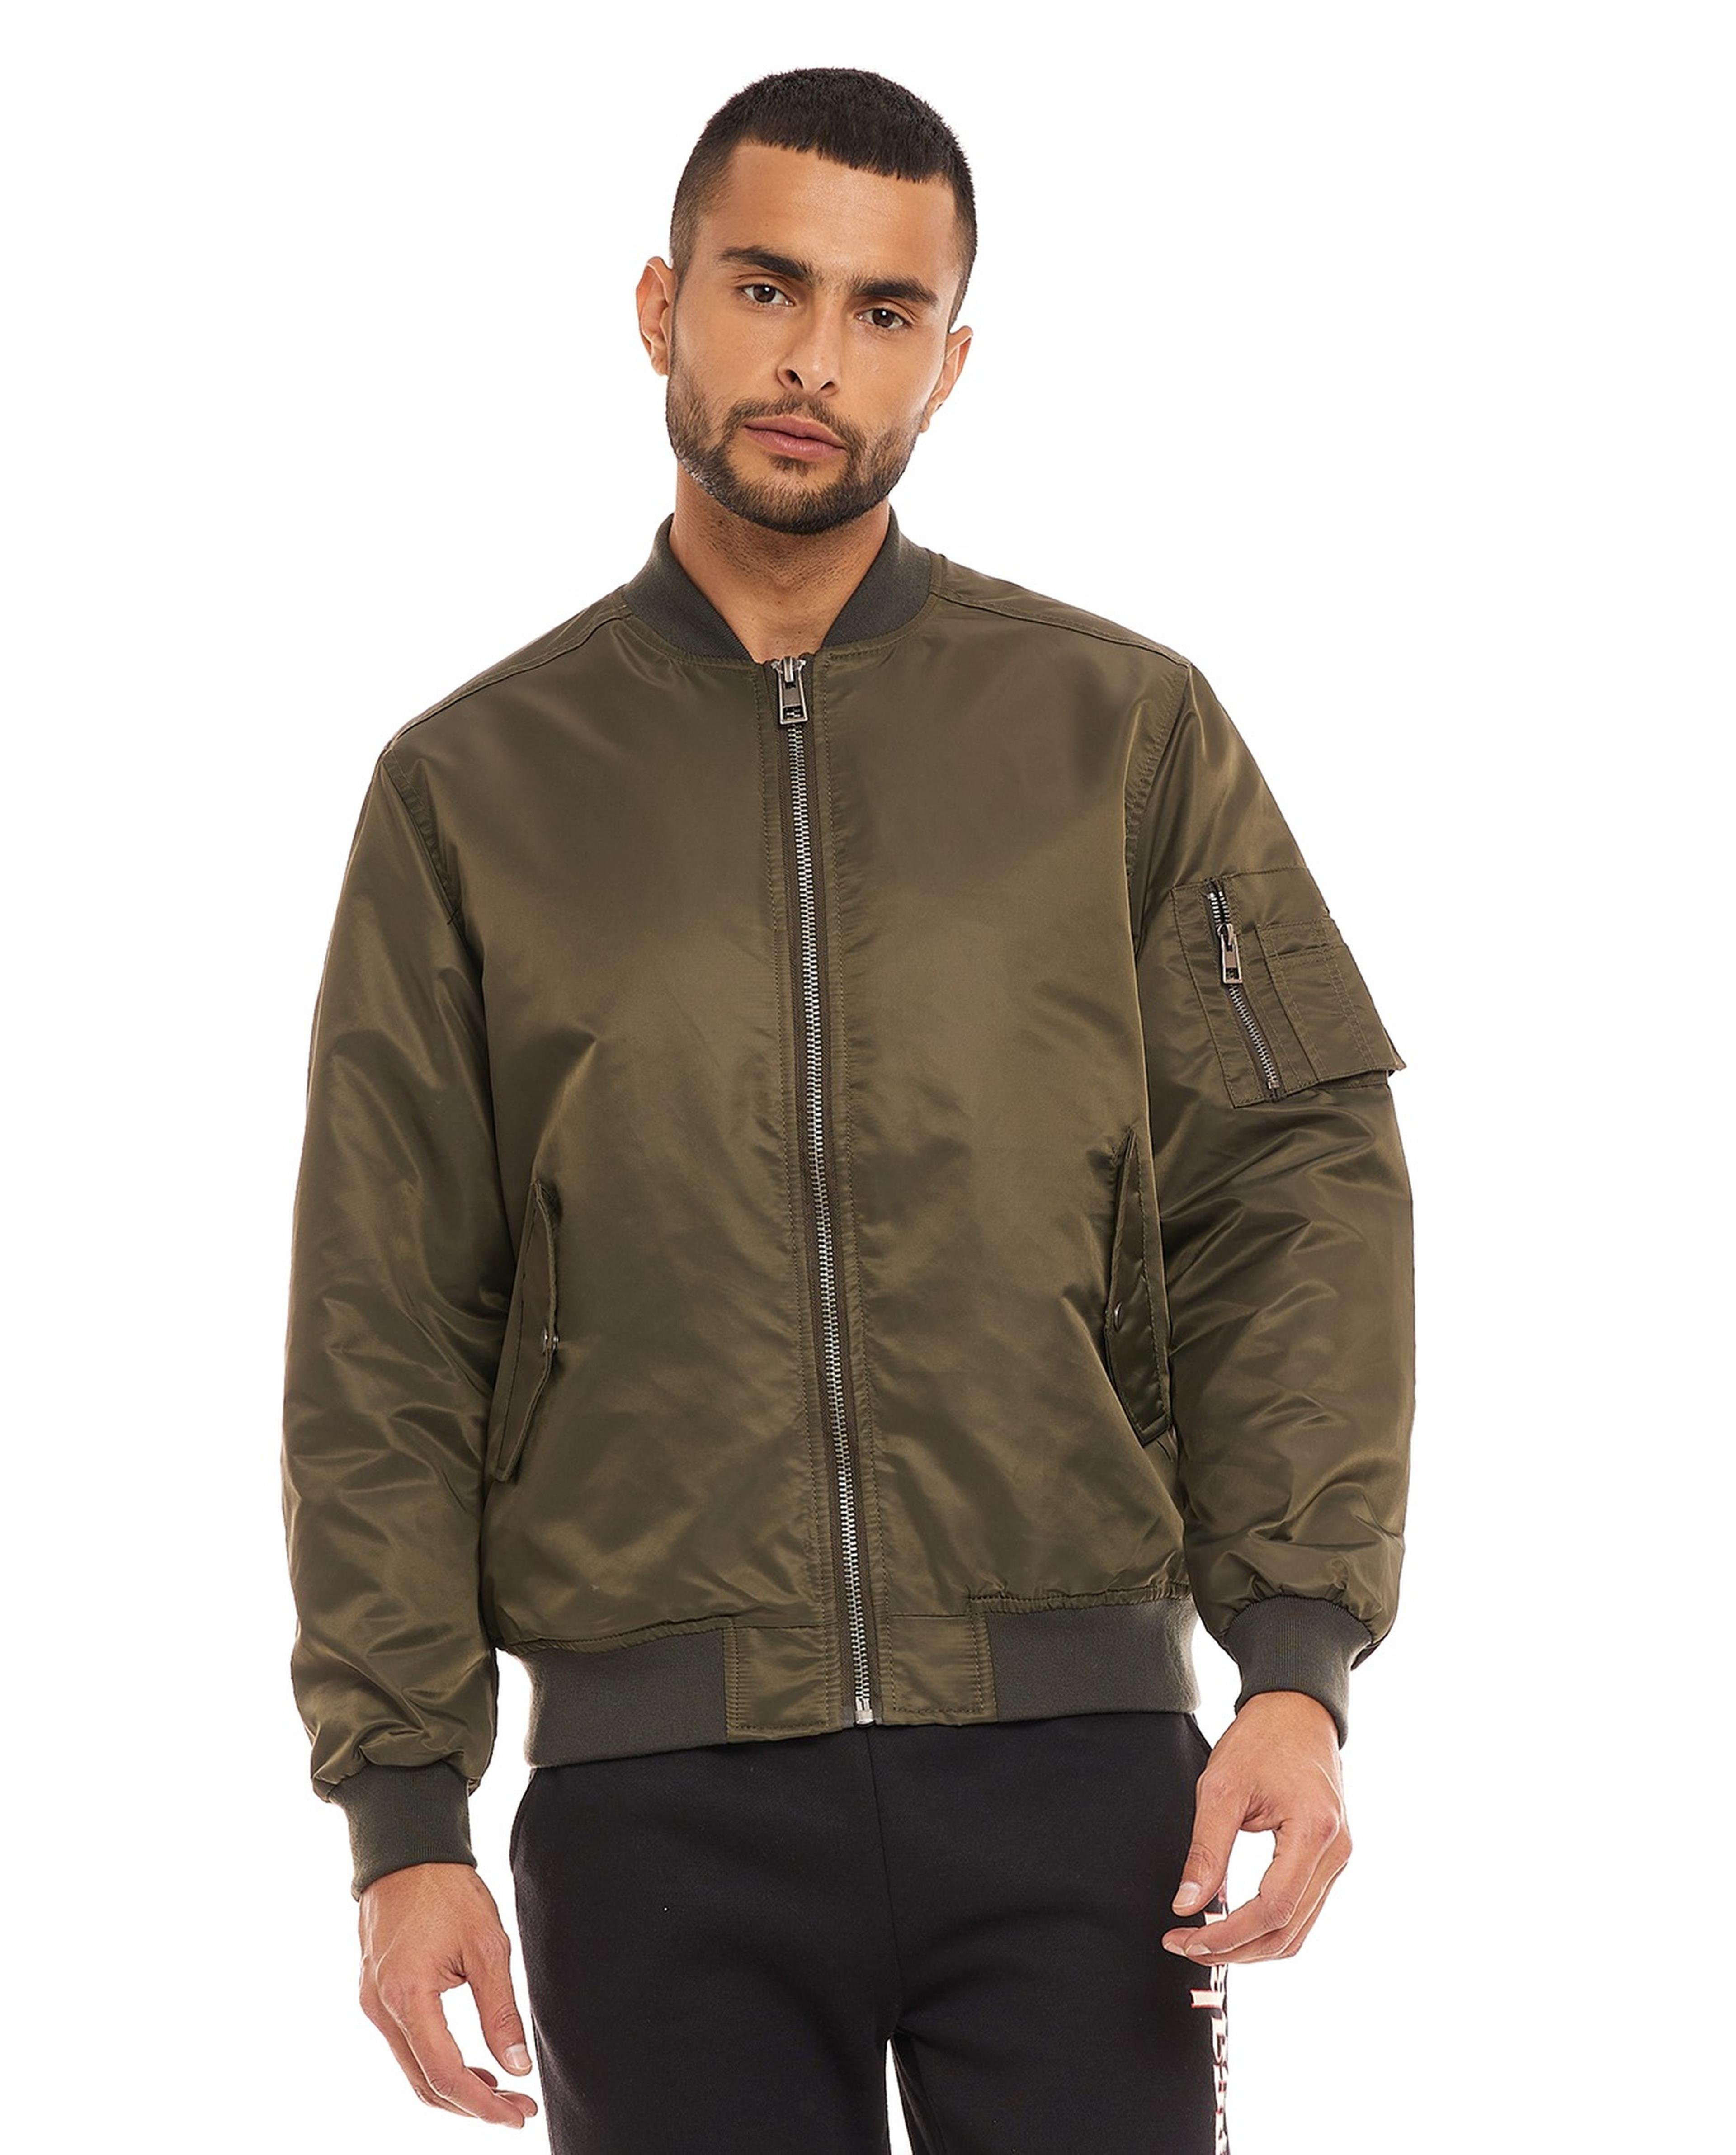 Solid Bomber Jacket with Zipper Closure